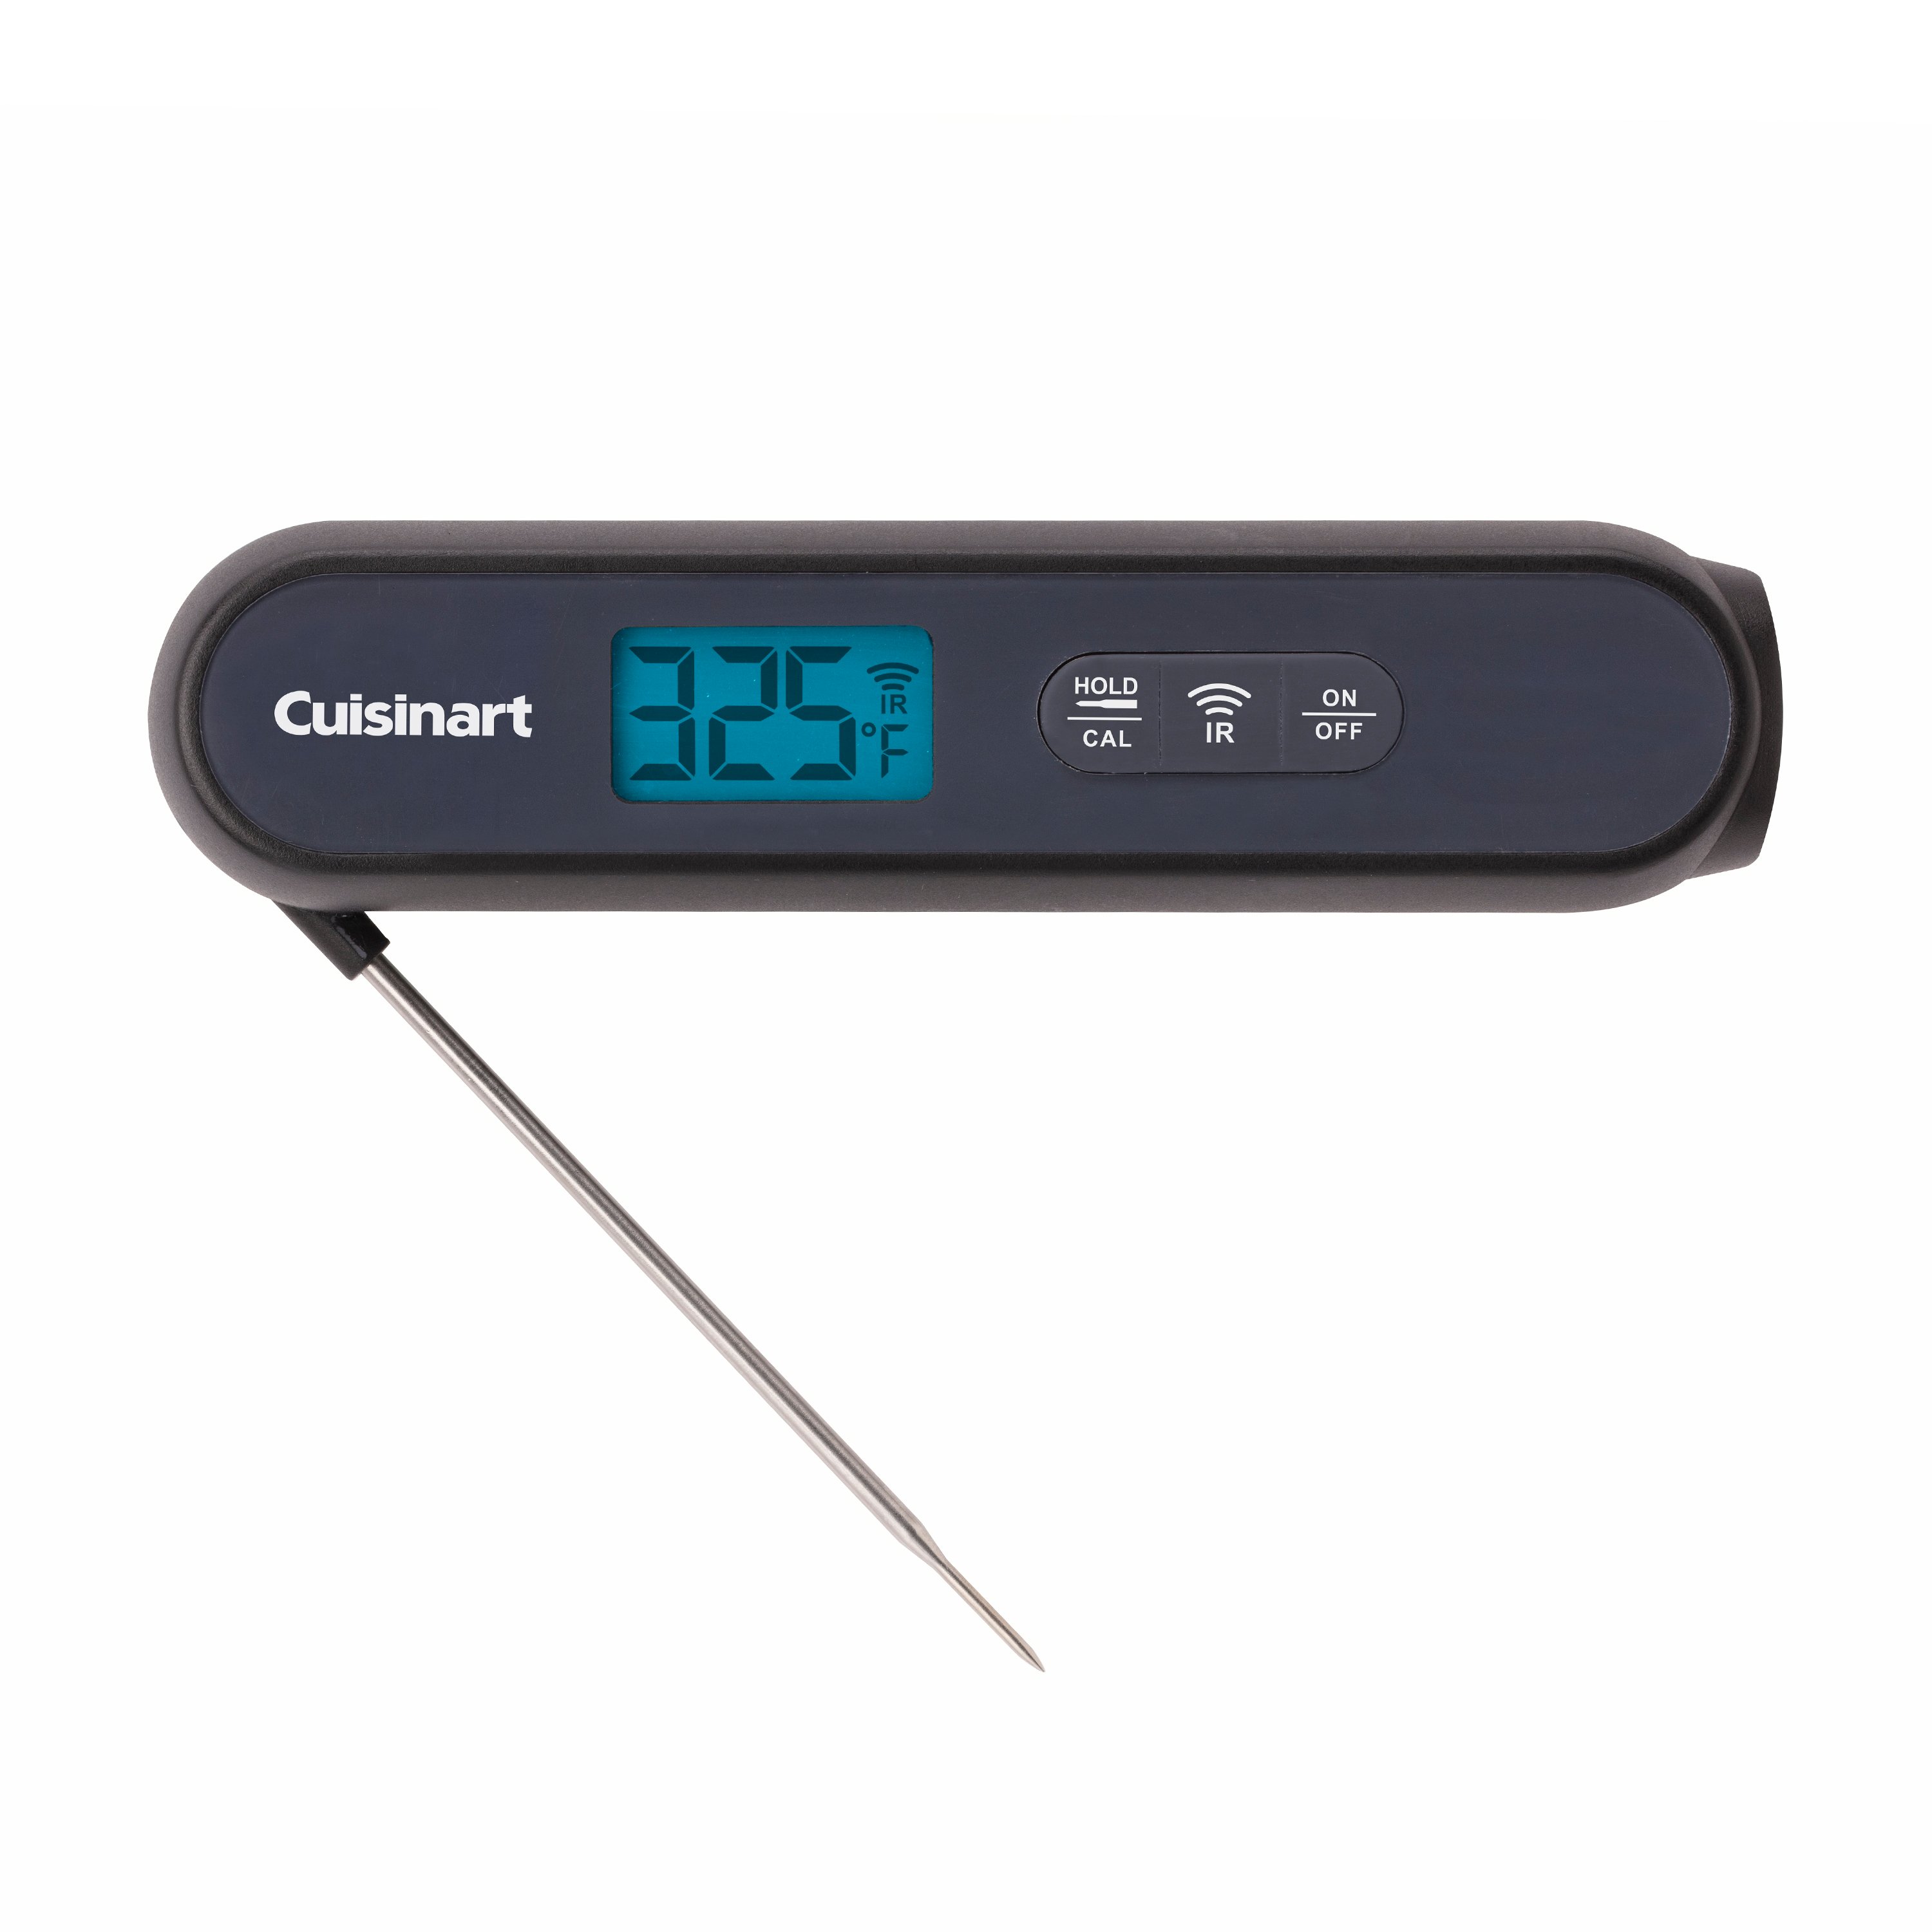 Yoder Smokers Folding Digital Thermometer